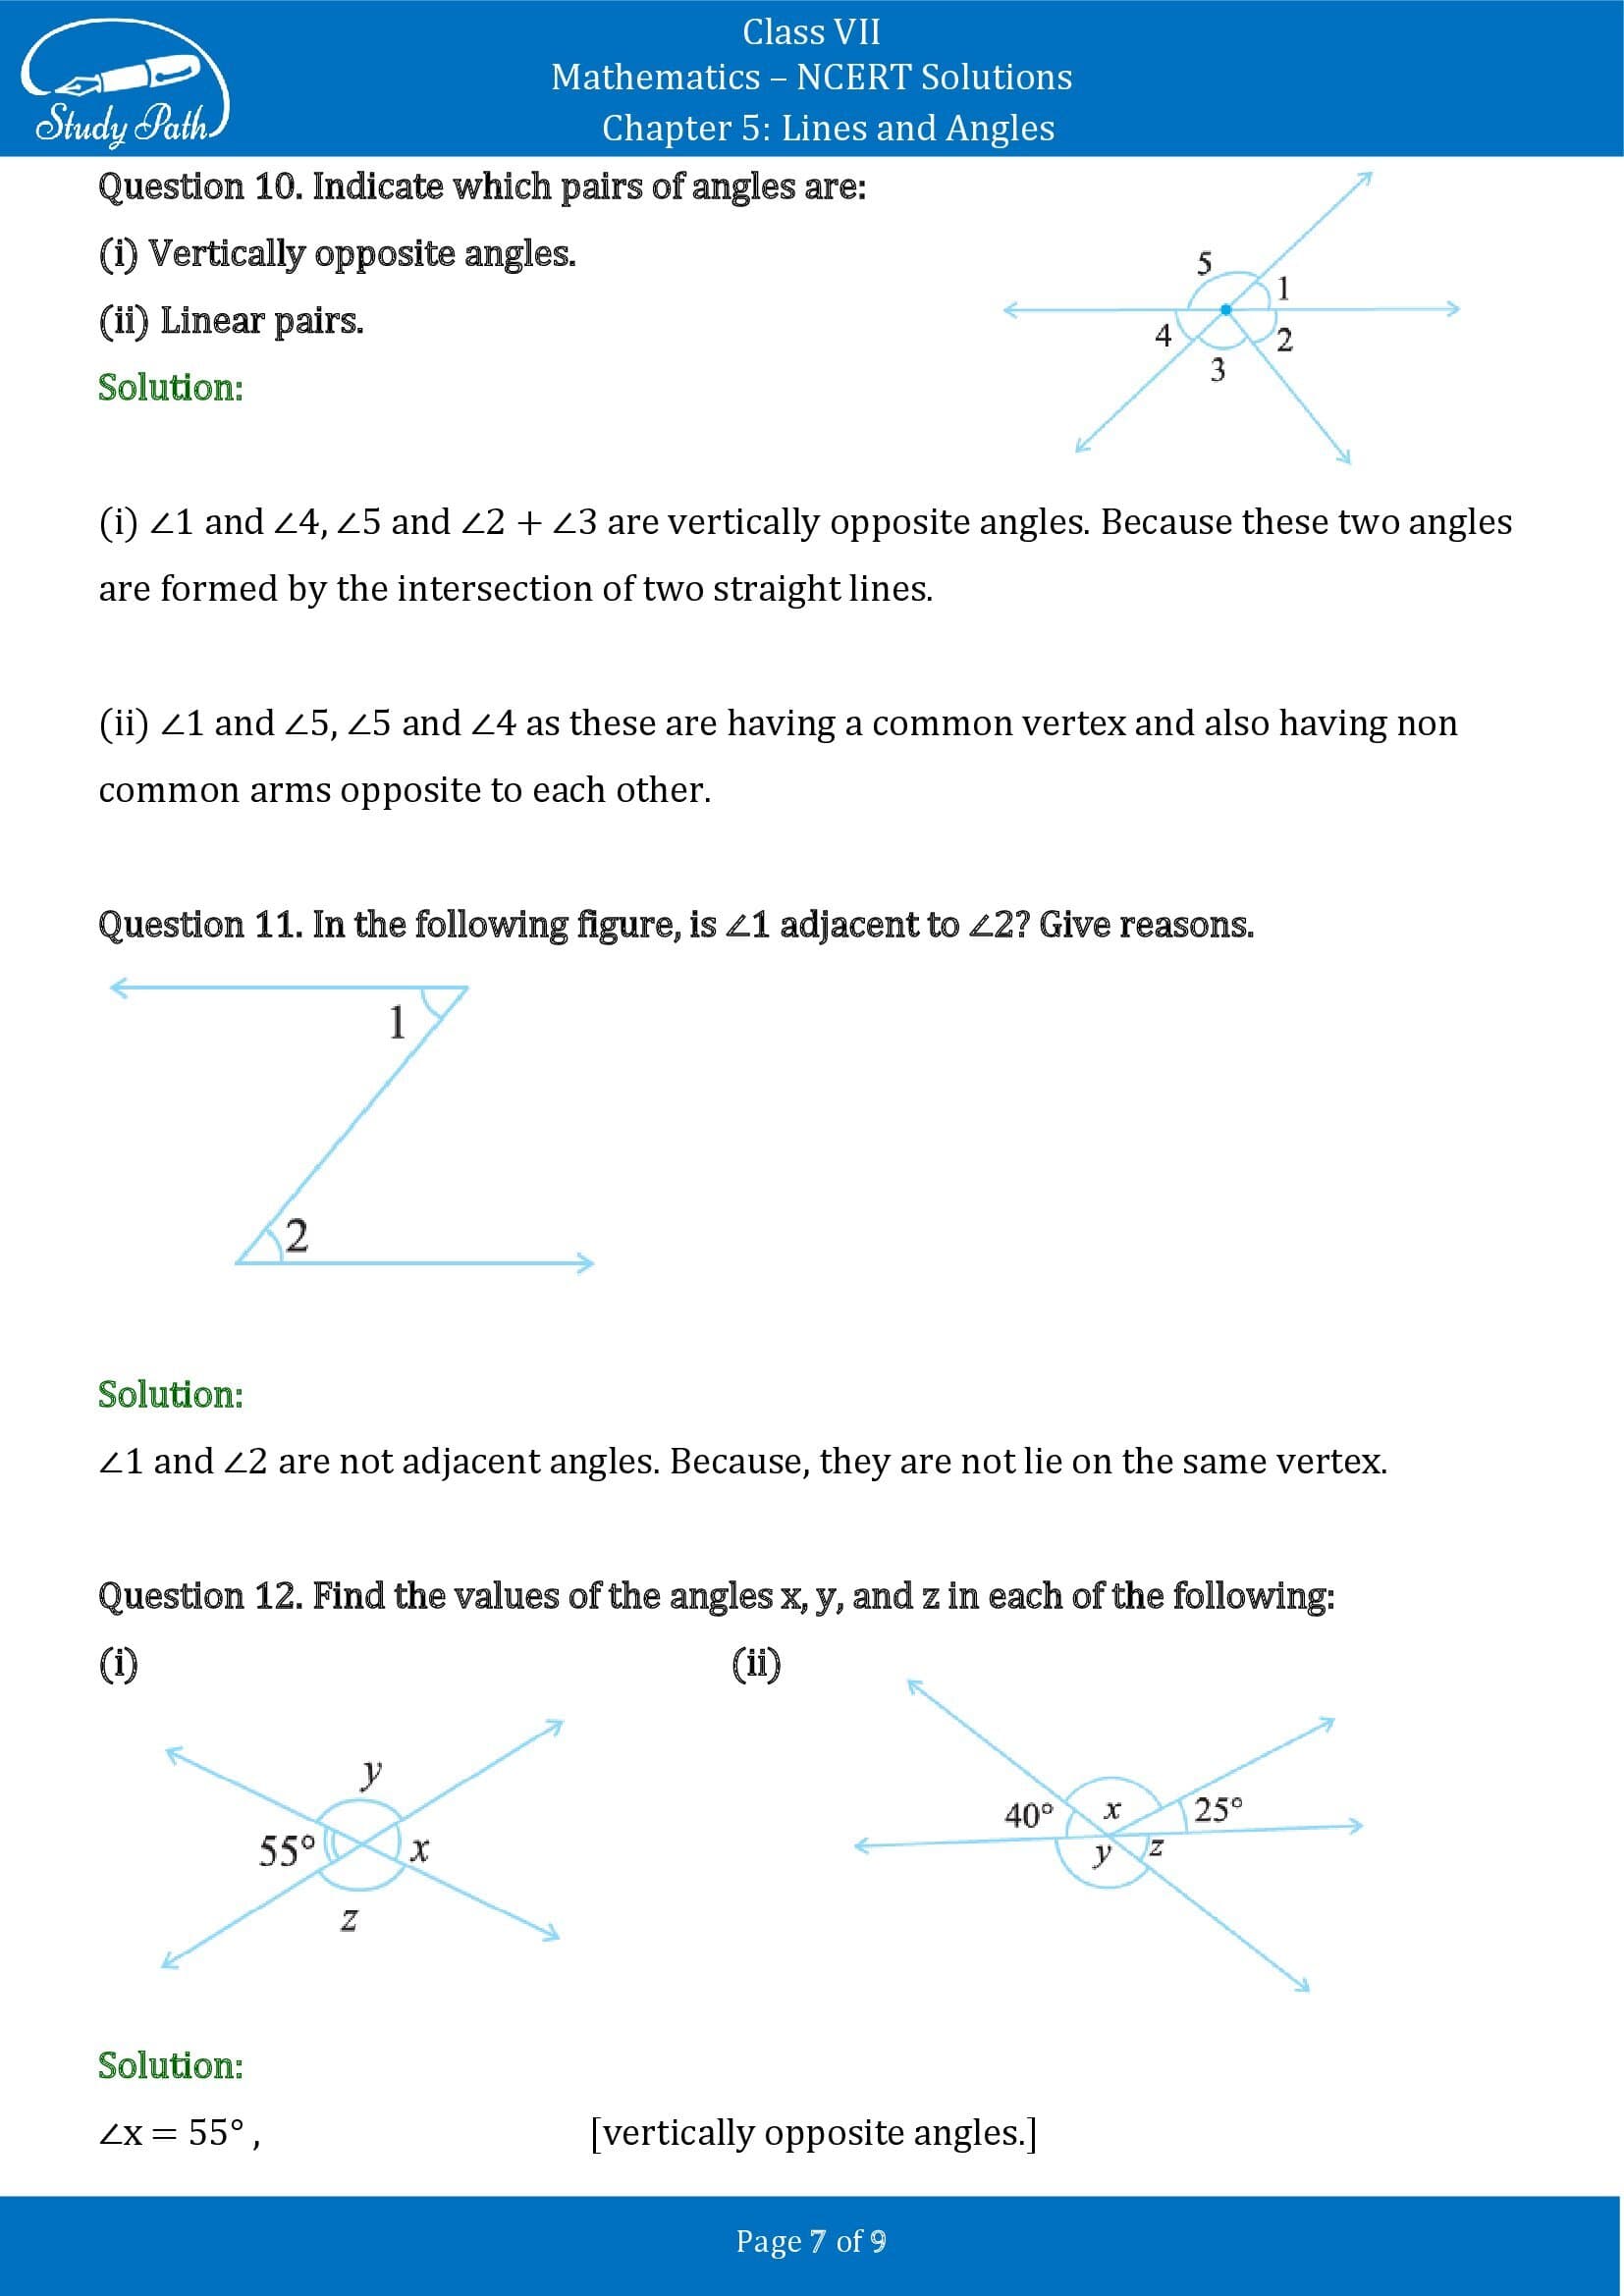 NCERT Solutions for Class 7 Maths Chapter 5 Lines and Angles Exercise 5.1 00007